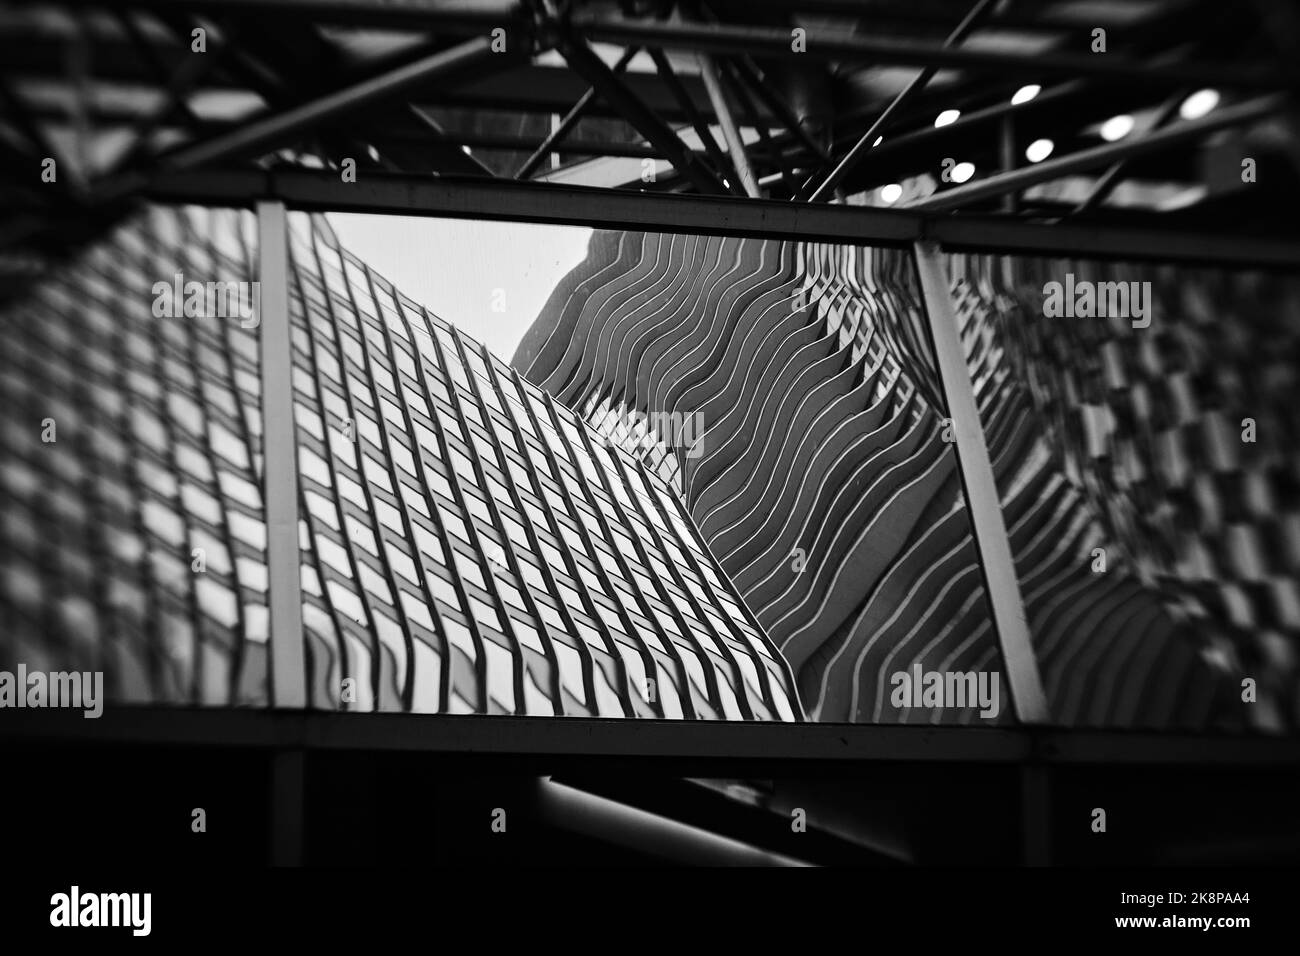 Black and white Lensbaby abstract images of modern Chicago architecture for use as metaphor or background. Stock Photo